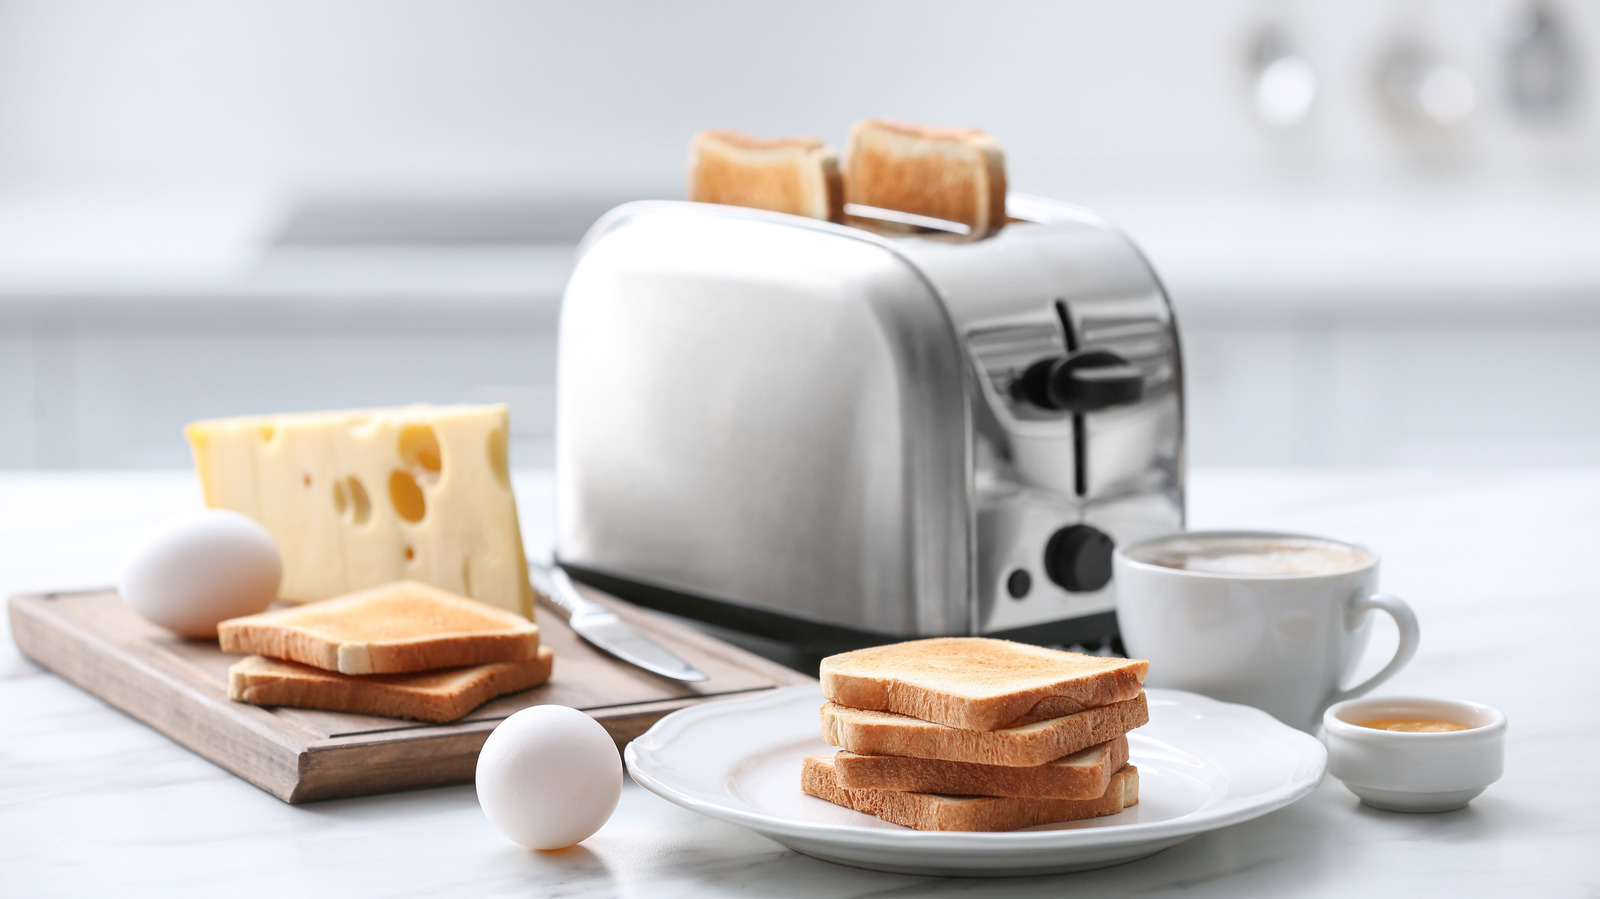 https://www.tastingtable.com/img/gallery/the-absolute-best-uses-for-your-toaster/l-intro-1651269895.jpg